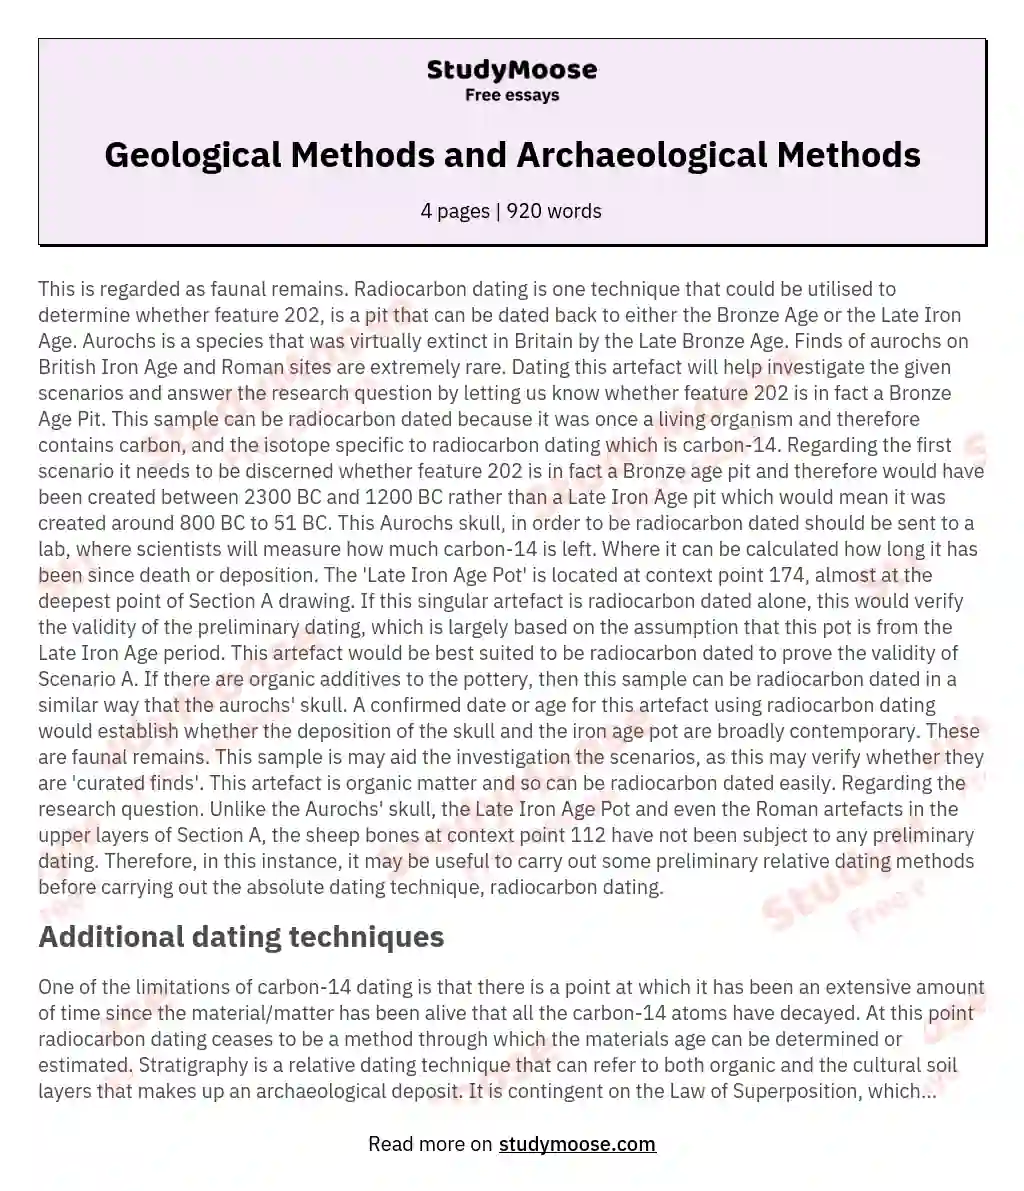 Geological Methods and Archaeological Methods essay